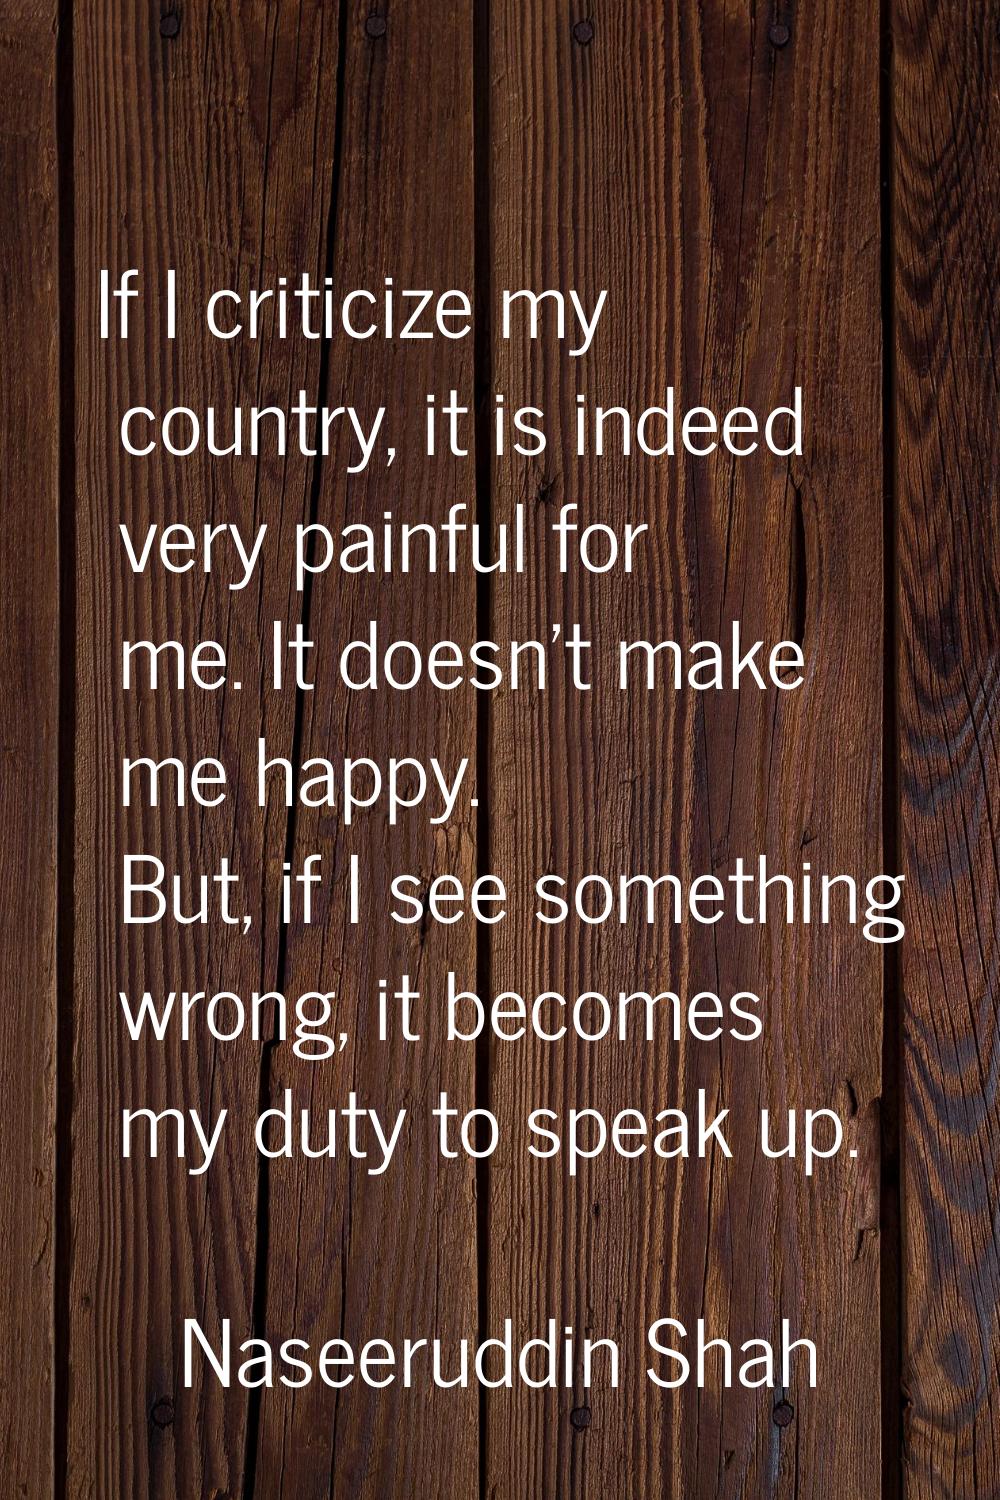 If I criticize my country, it is indeed very painful for me. It doesn't make me happy. But, if I se